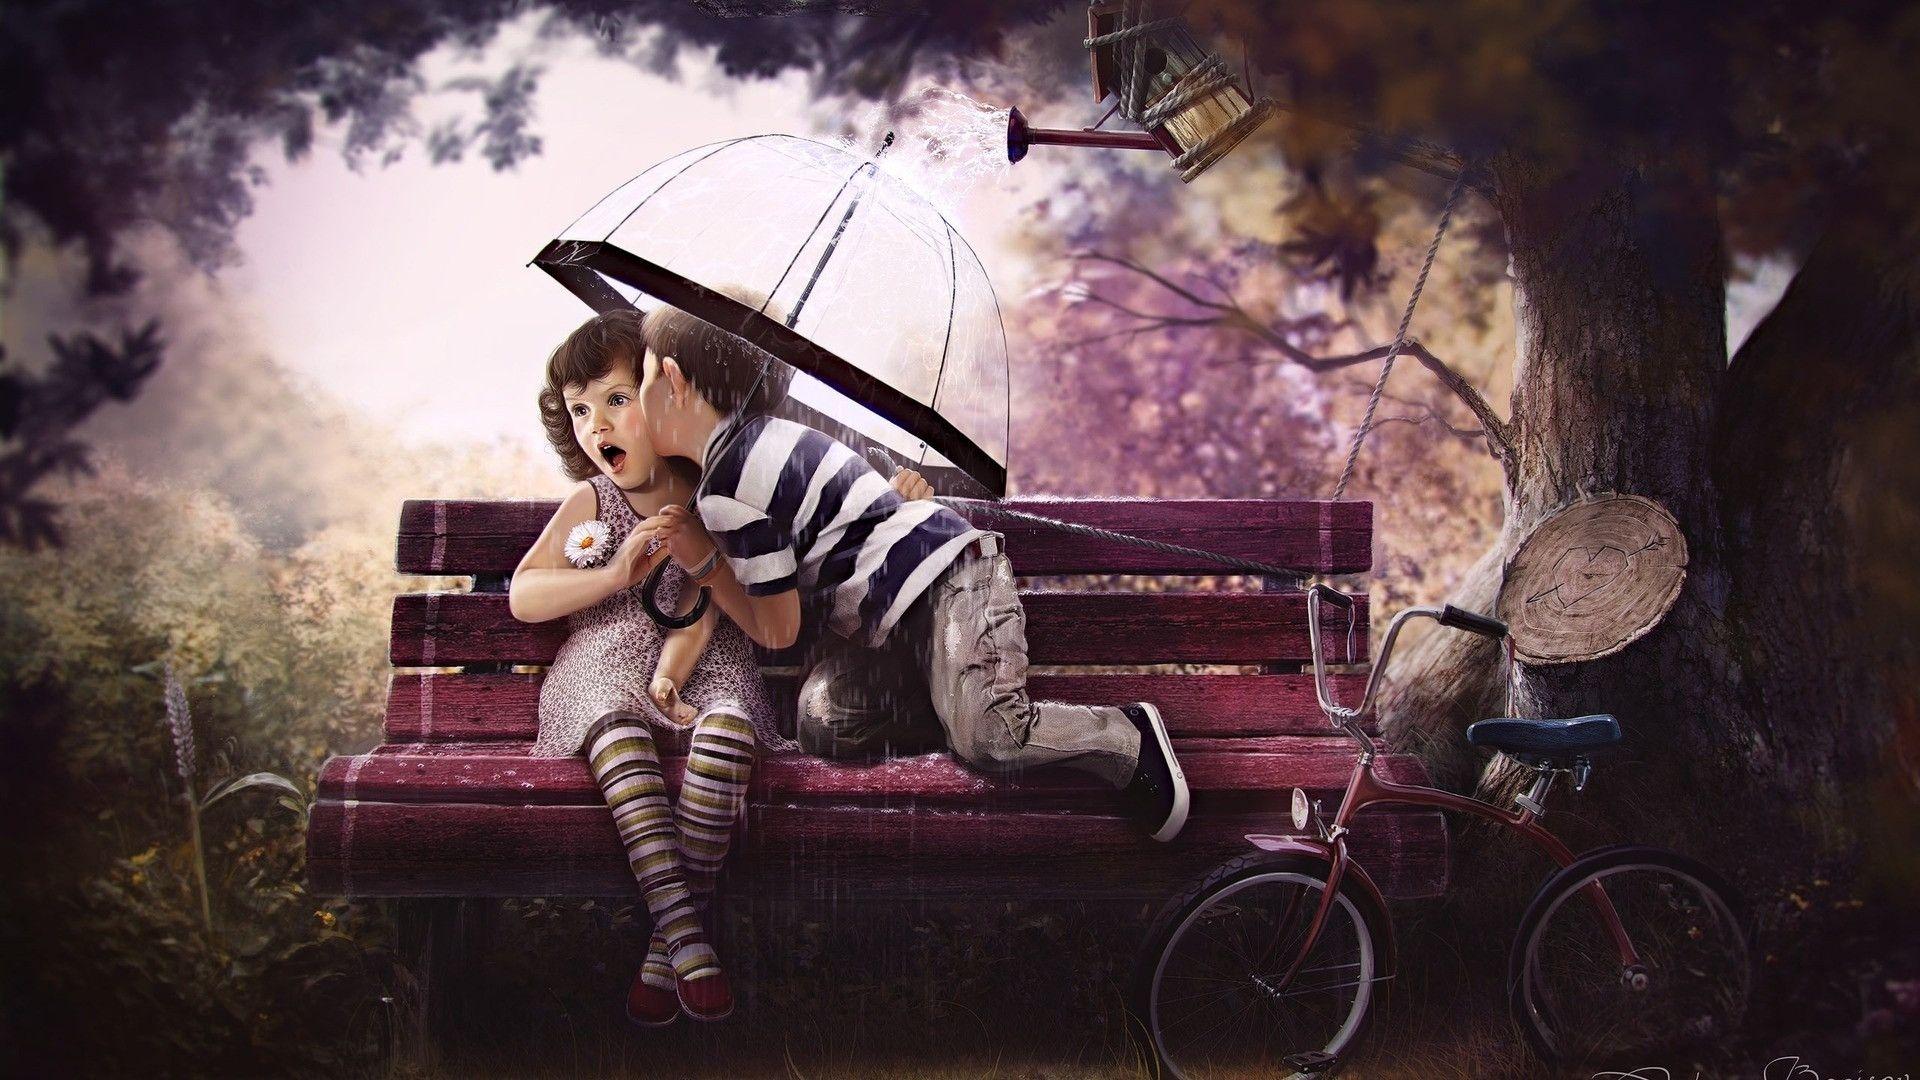 Boy And Girl Love Picture And Wallpaper For Desktop